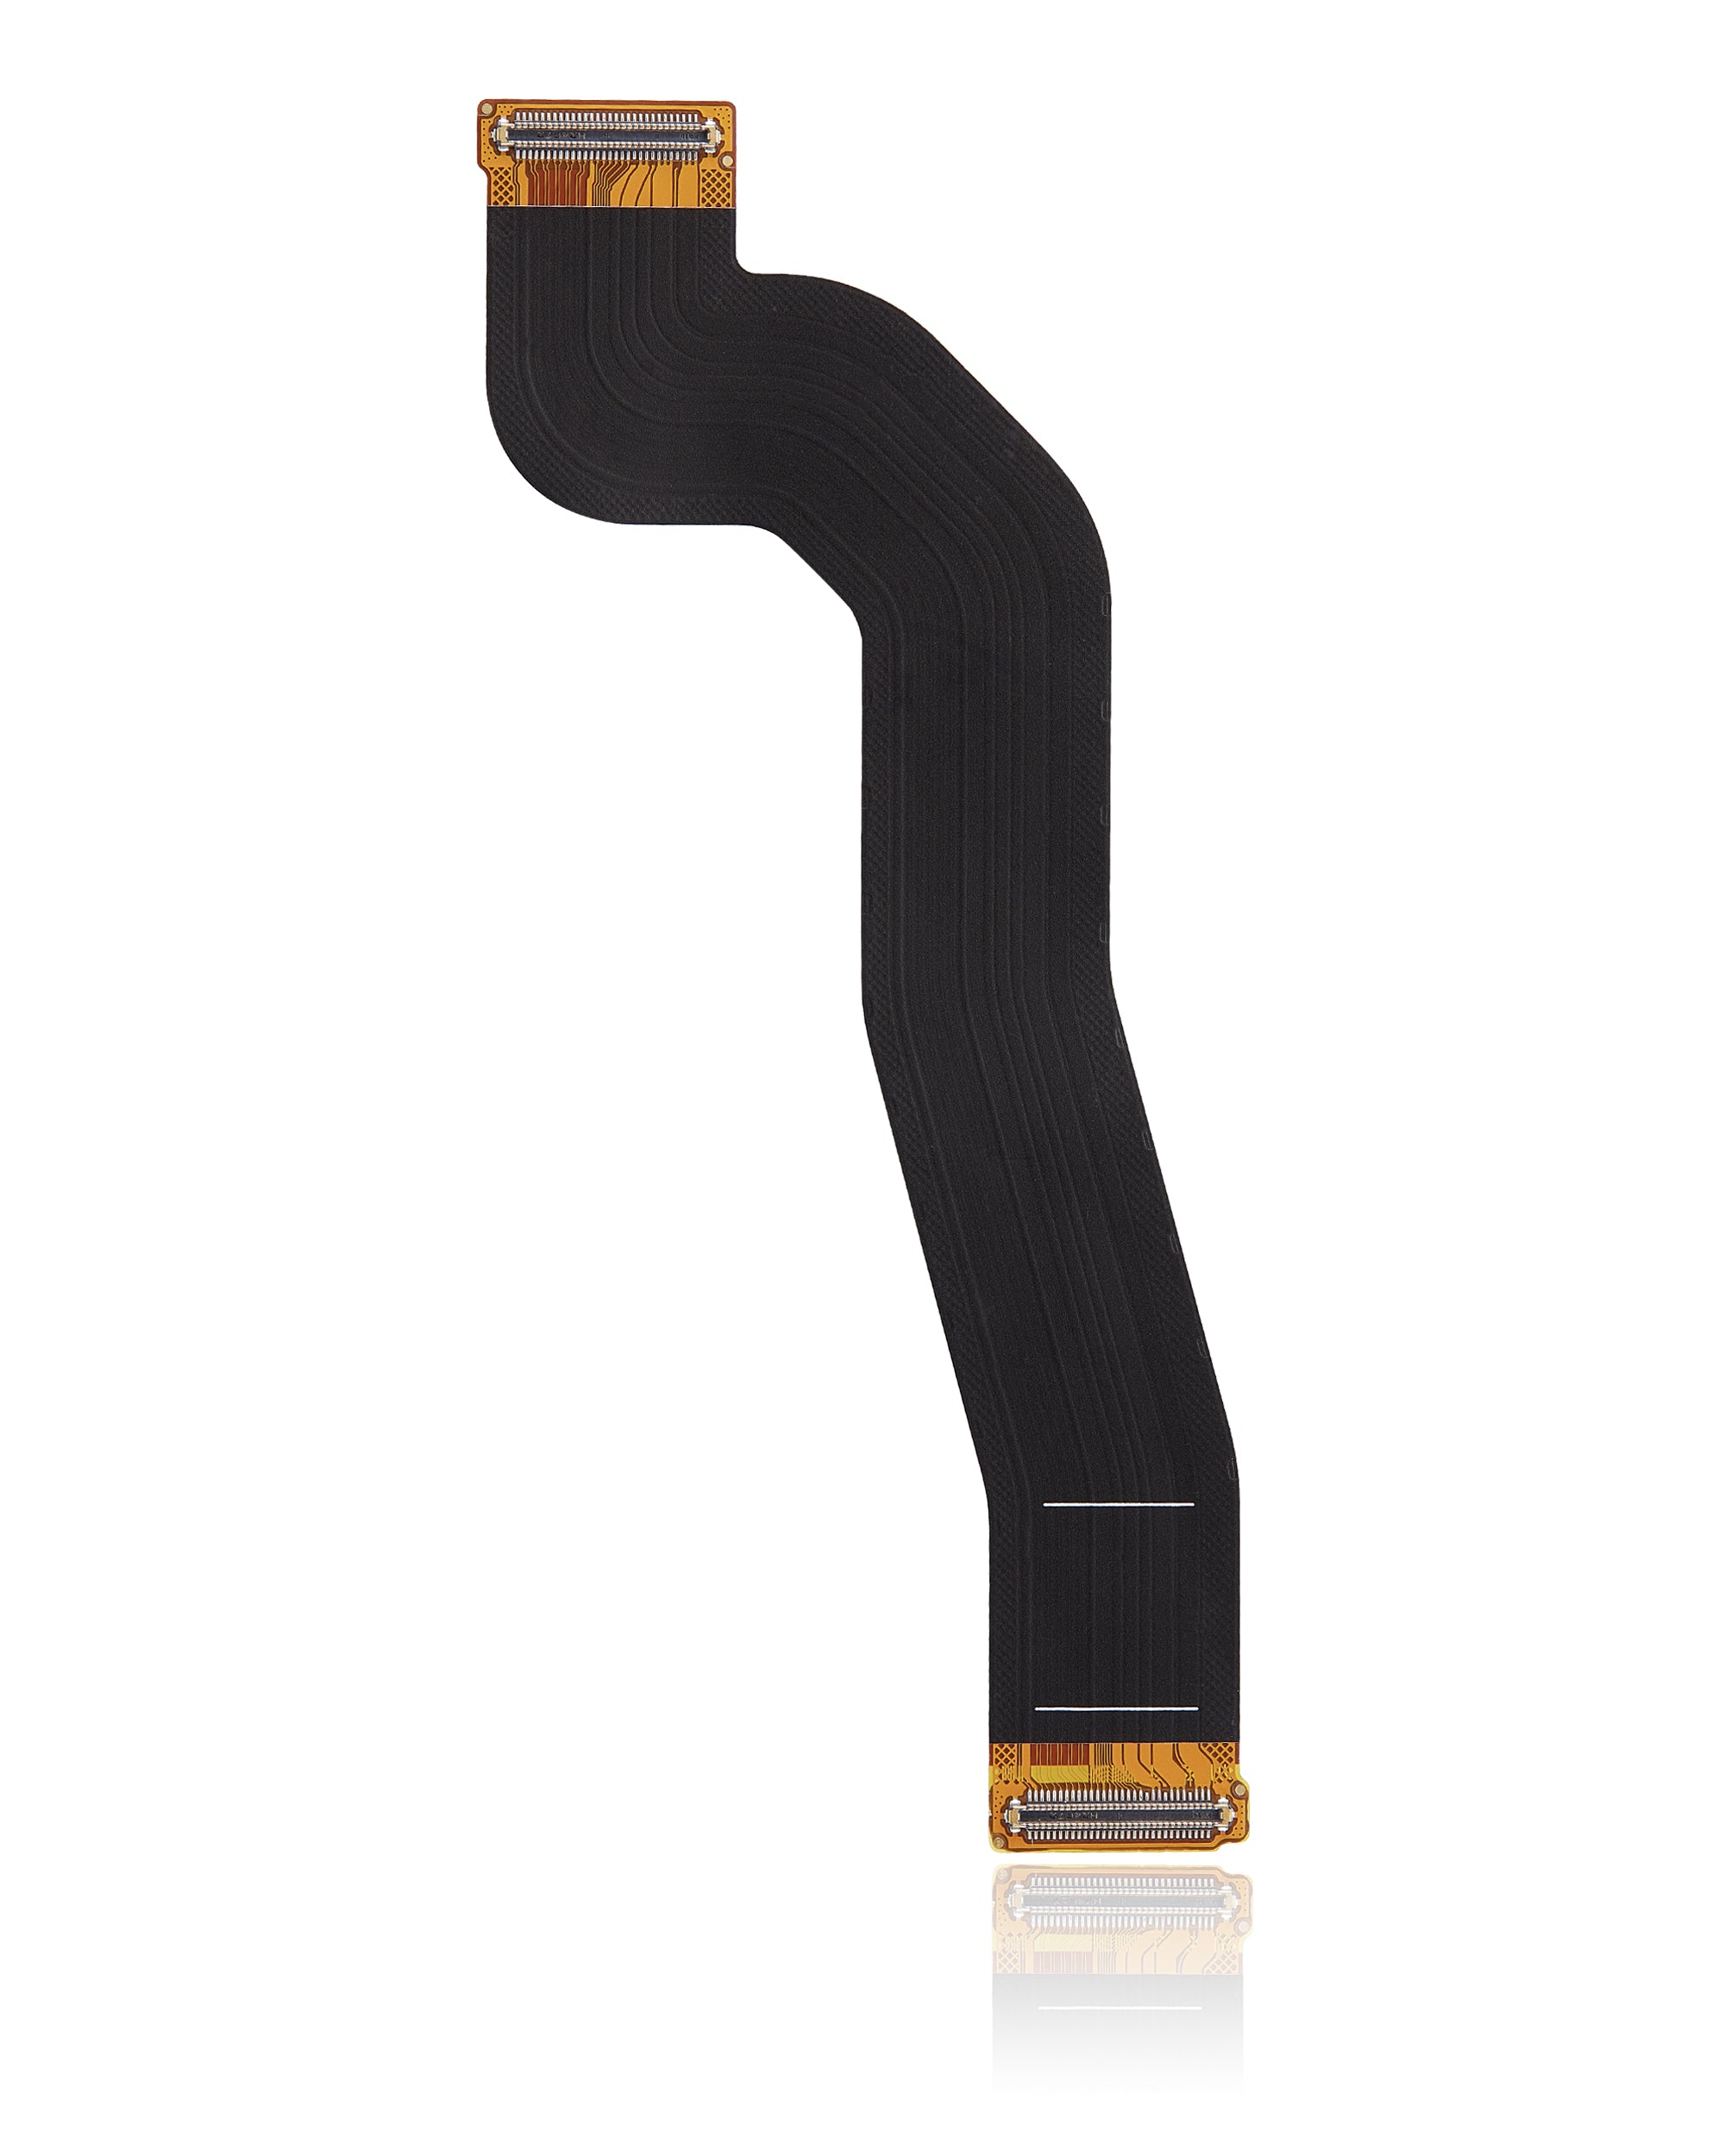 For Samsung Galaxy S22 5G LCD Flex Cable Replacement